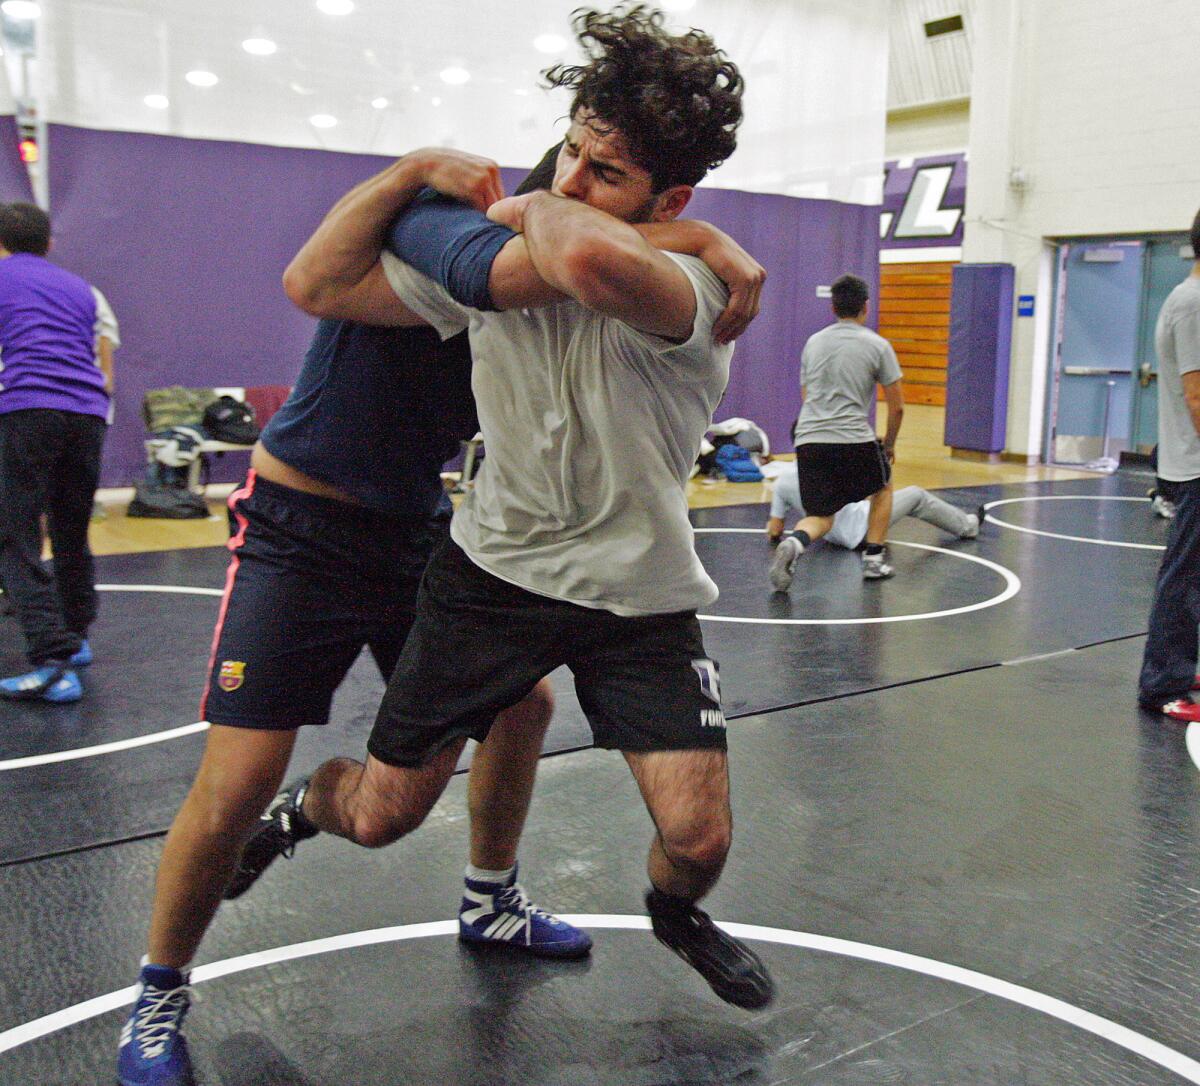 Hoover's Davit Nersisyan practices a wrestling technique with a partner at wrestling practice at Hoover High School in Glendale on Monday, December 1, 2014.